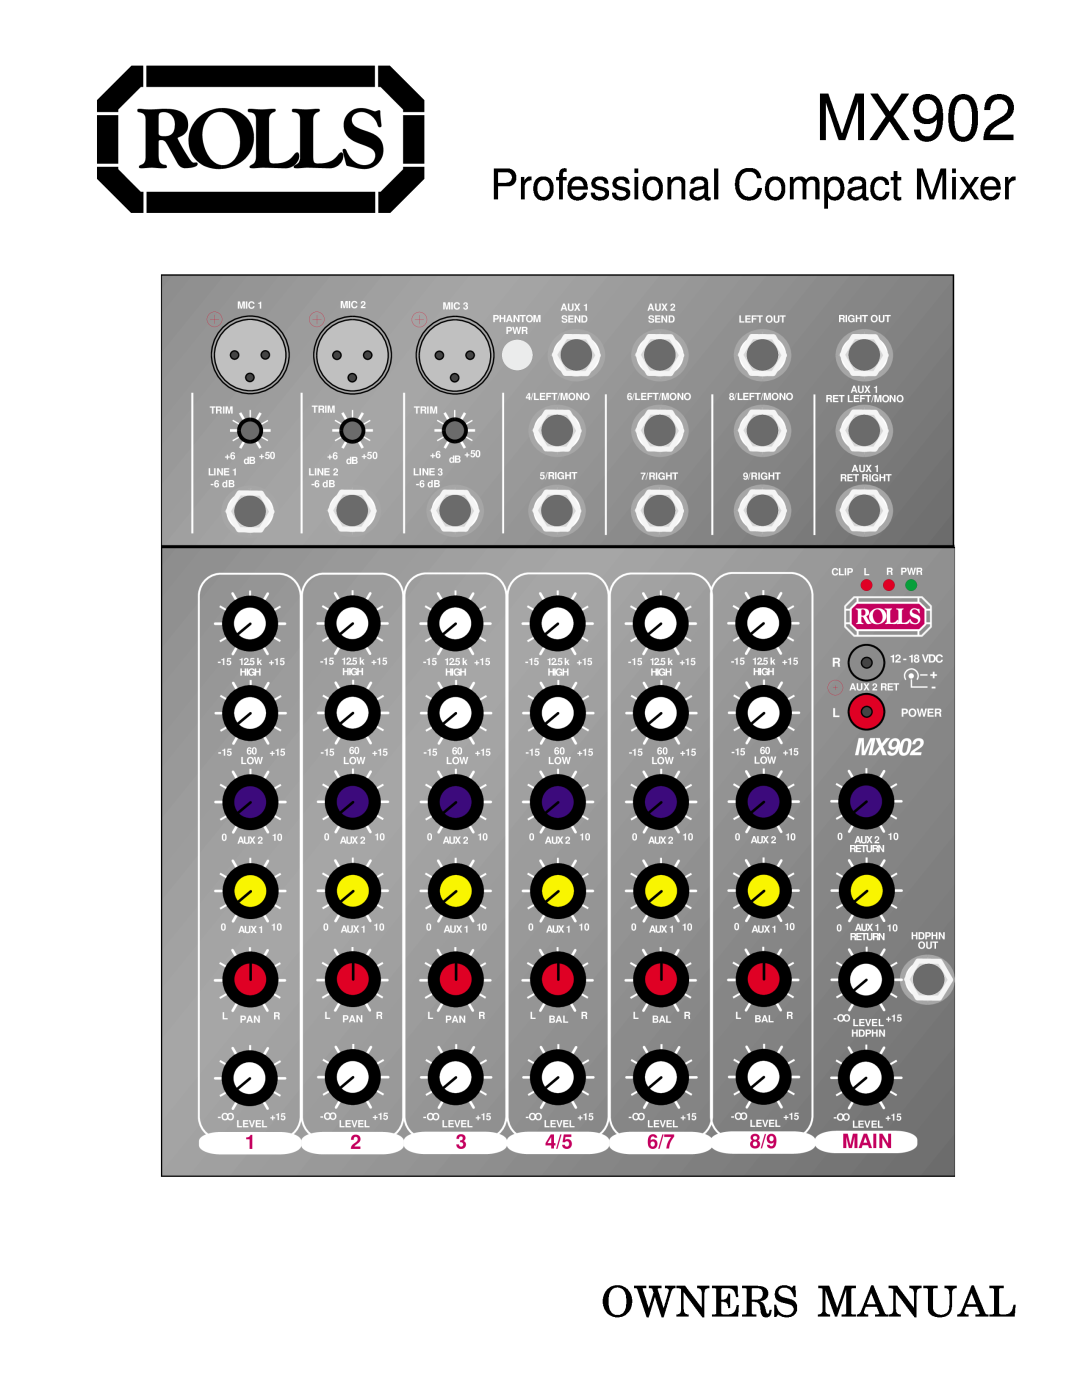 Rolls MX902 owner manual Professional Compact Mixer, Main, Power 